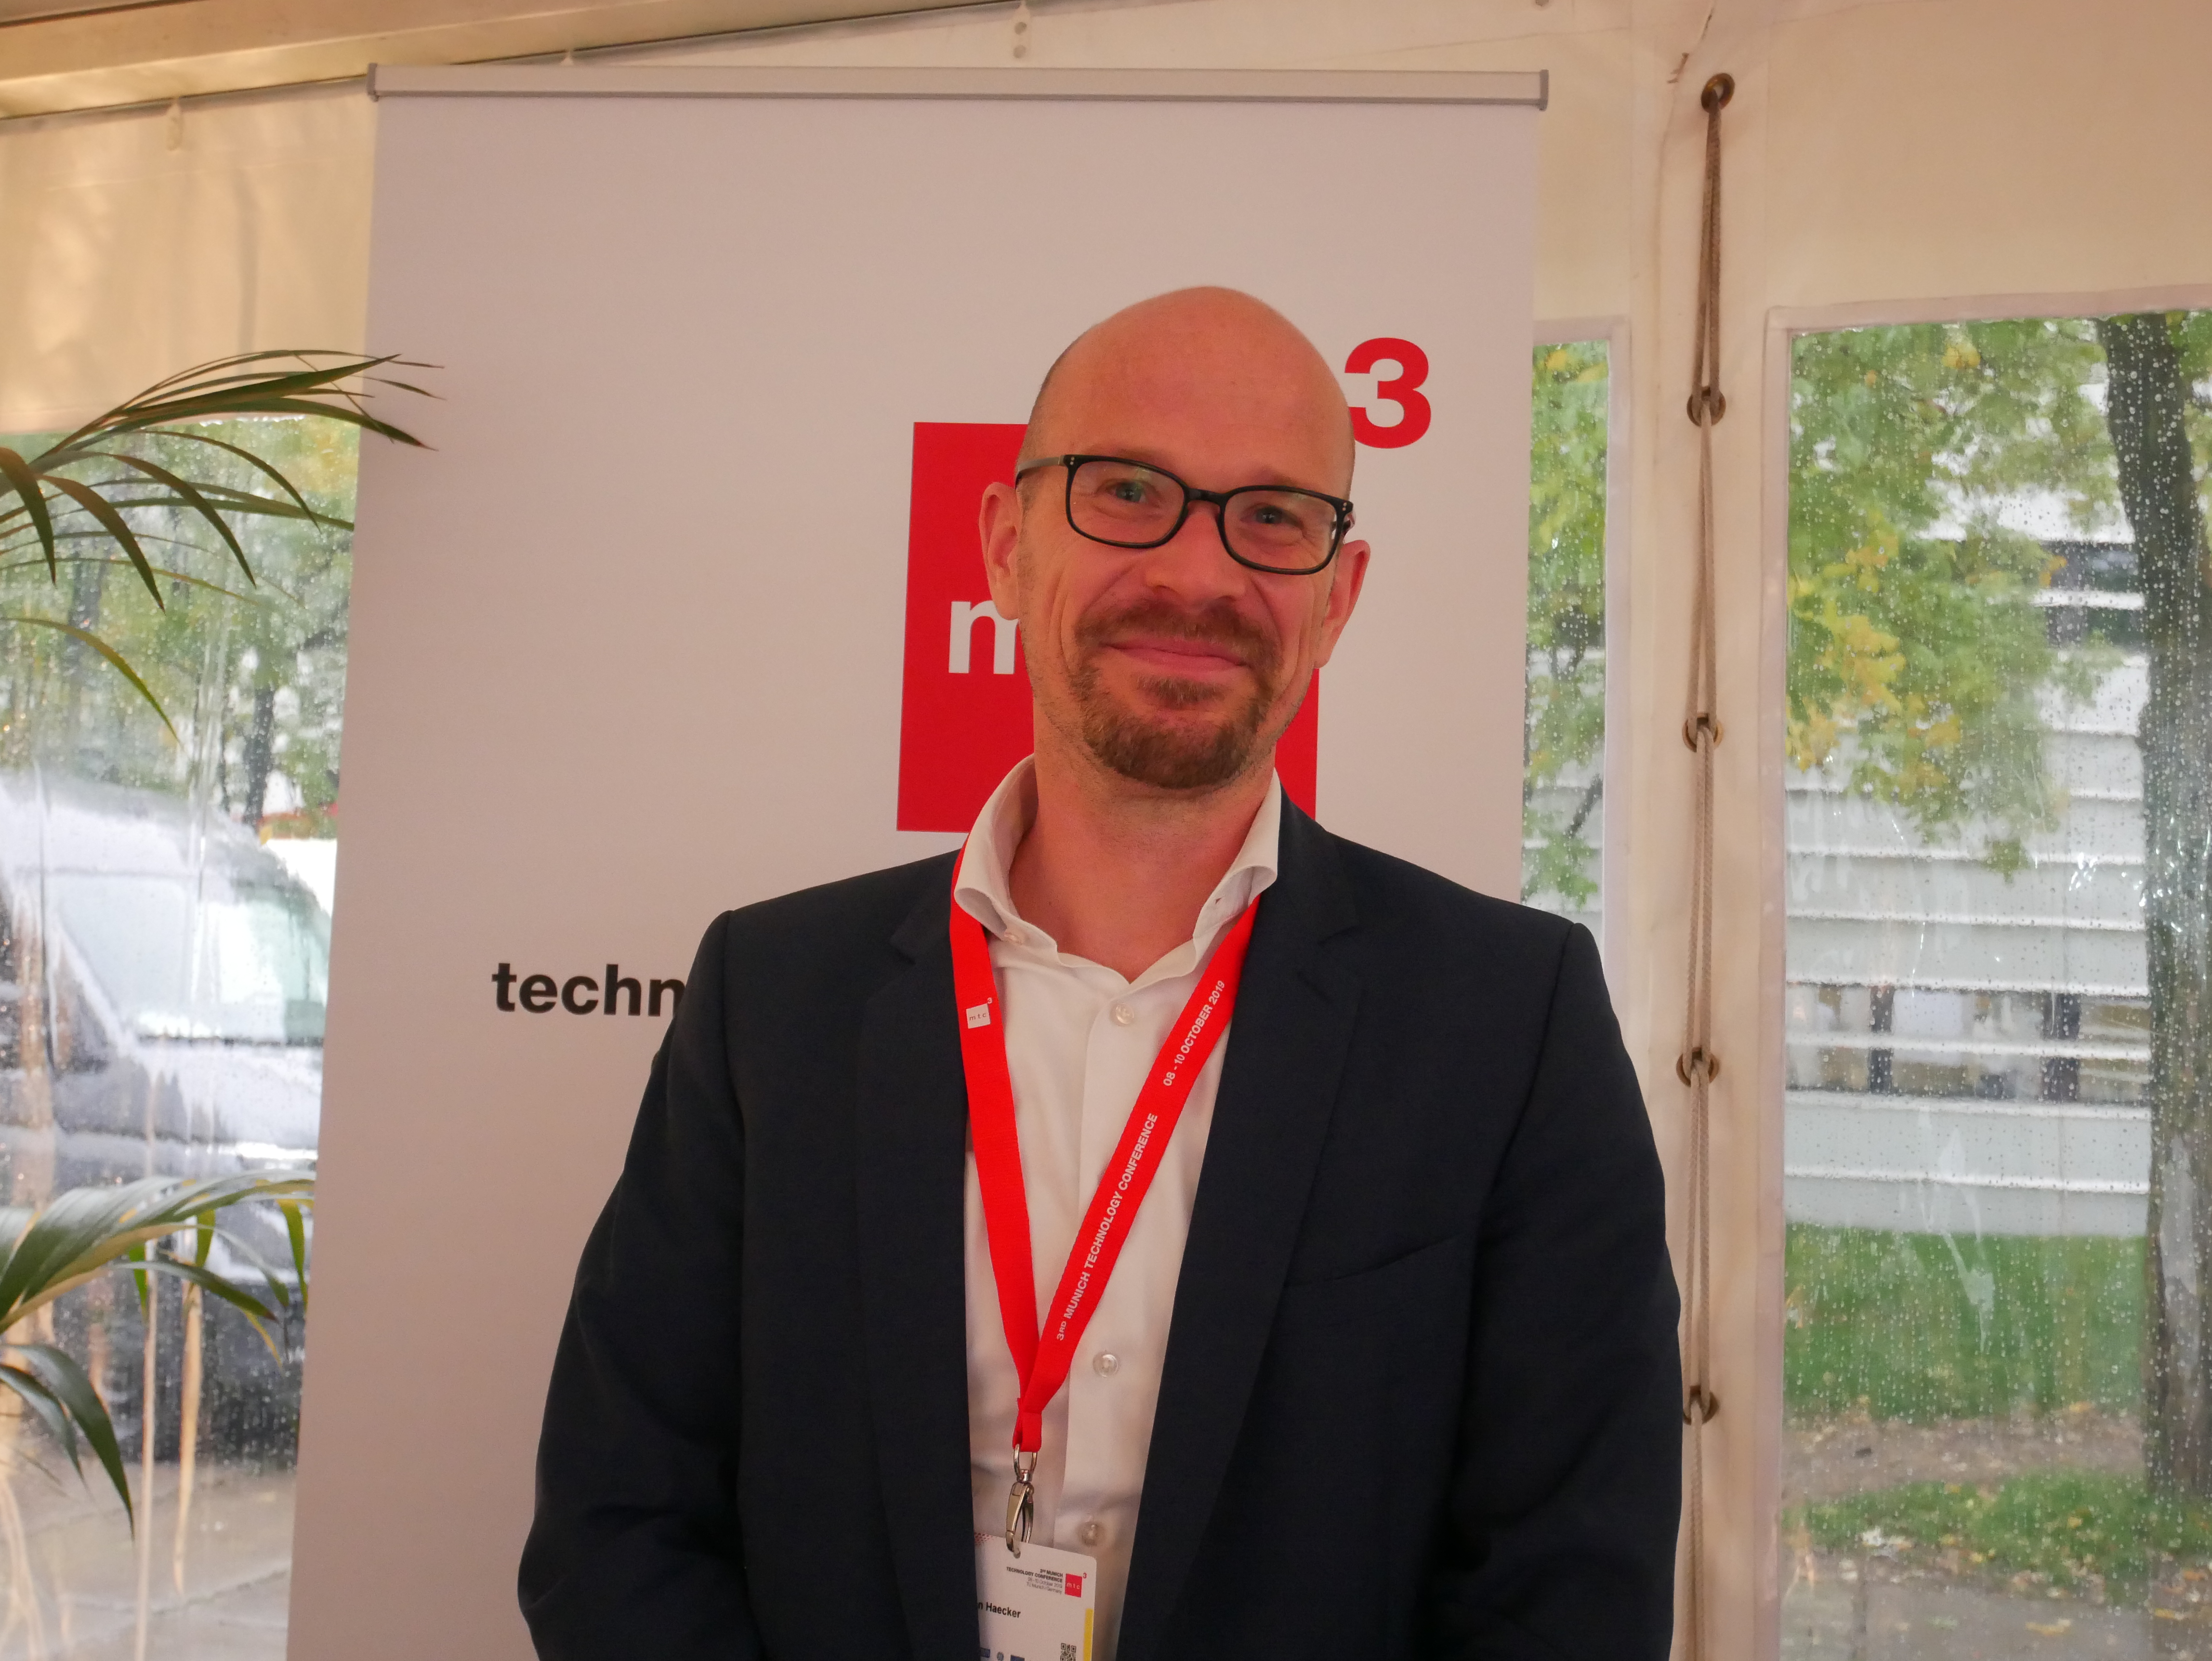 Dr. Christian Haecker, Head of Additive Manufacturing Industrialization at Oerlikon Group. Photo by Tia Vialva.